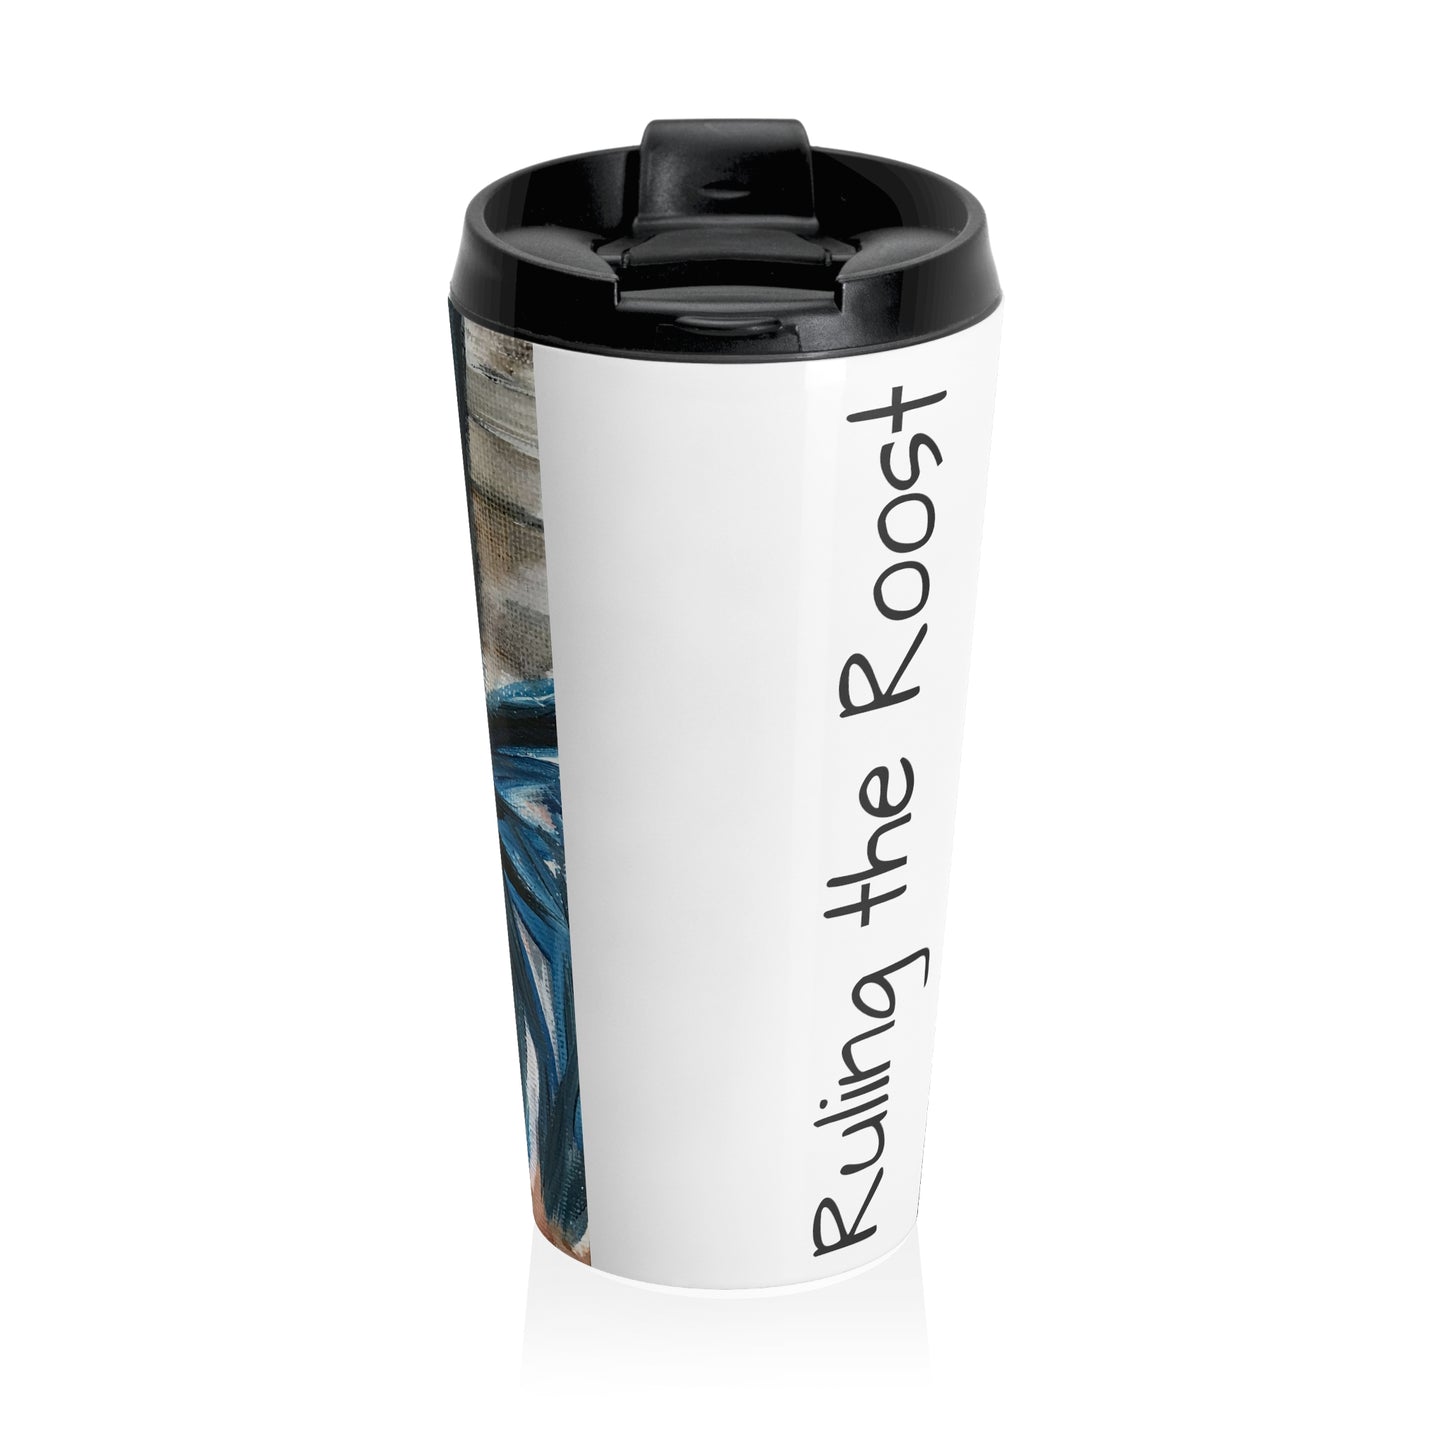 Ruling the Roost Stainless Steel Travel Mug